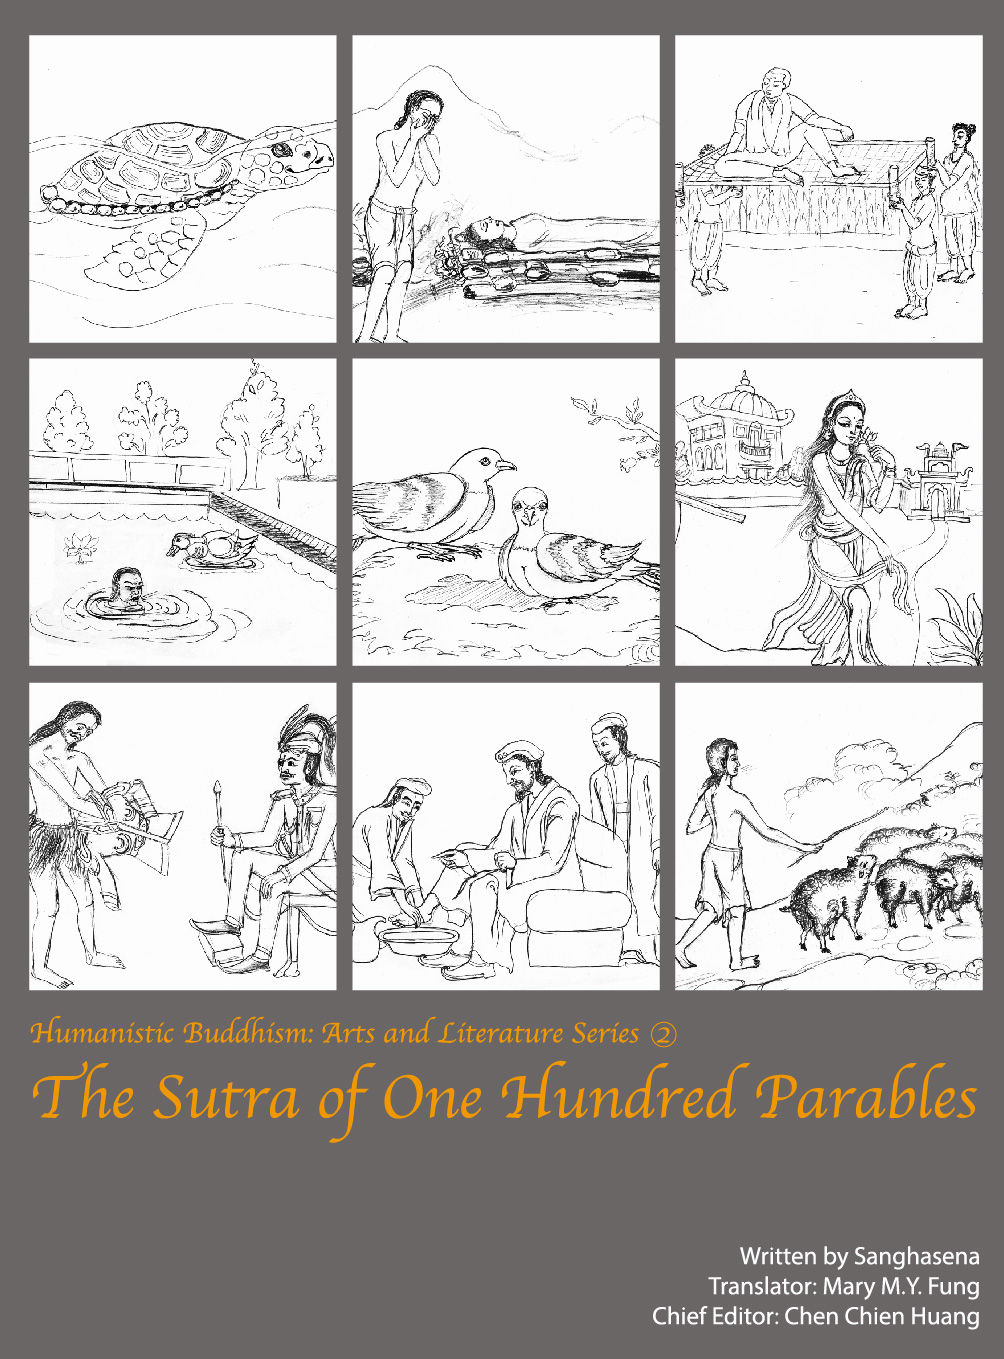 (2) The Sutra of One Hundred Parables